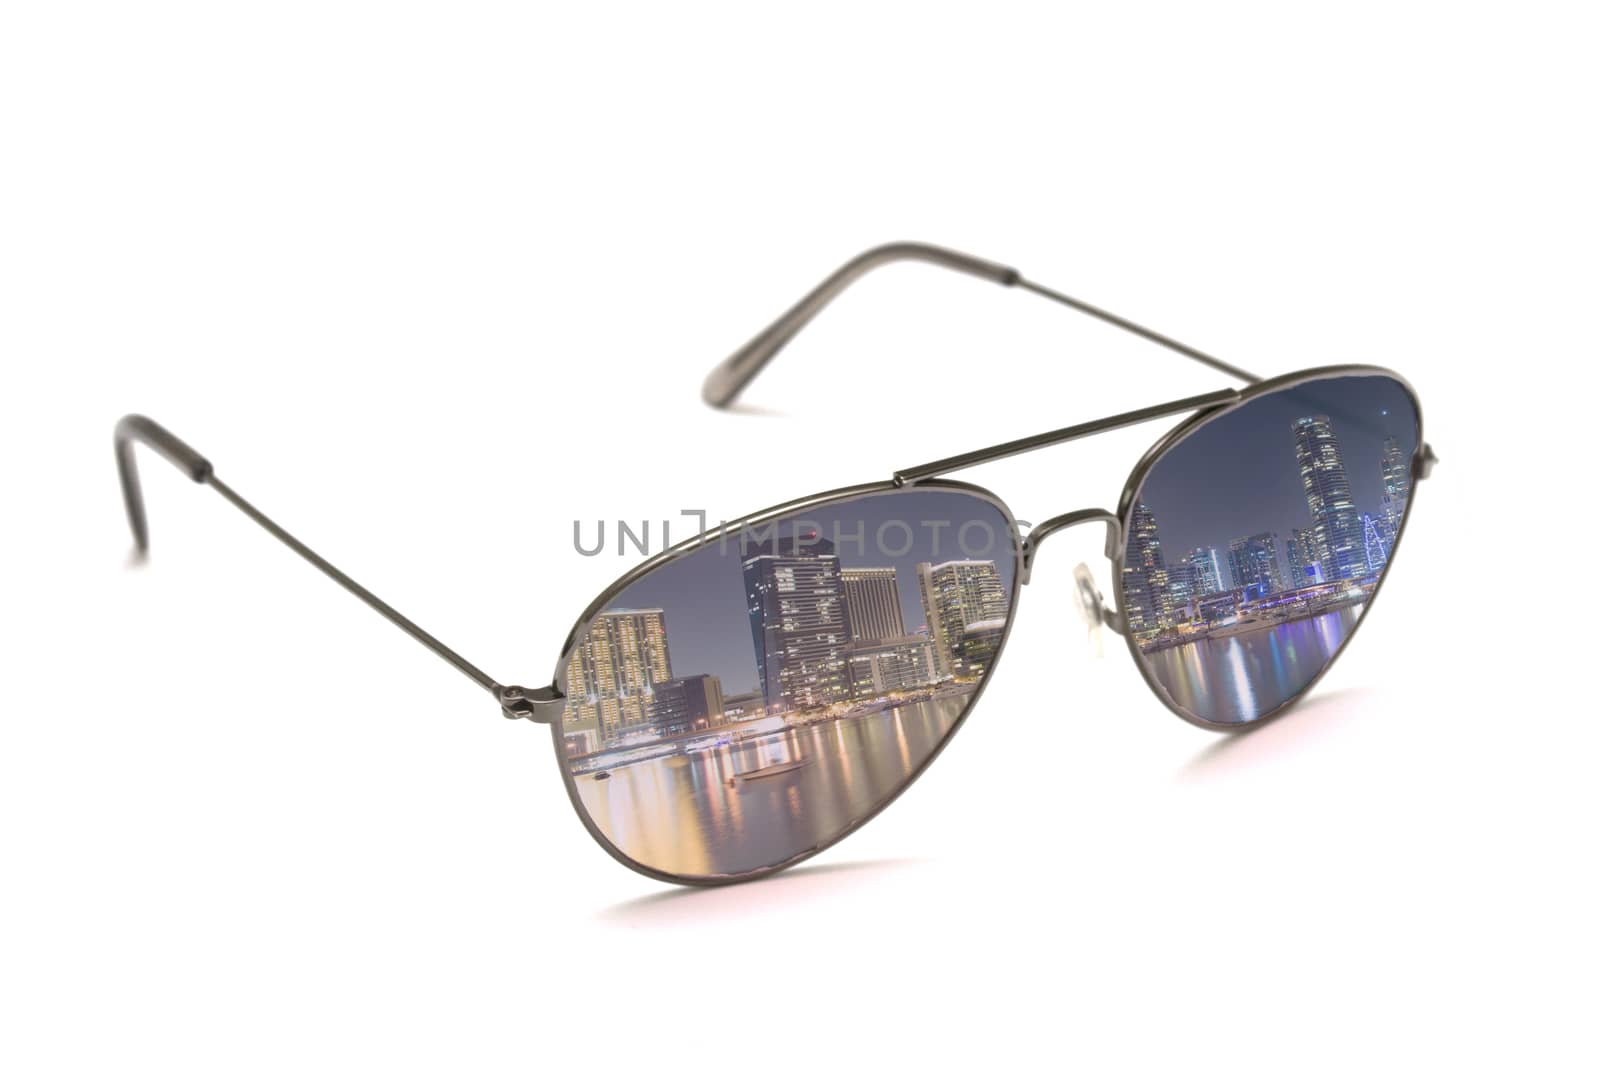 Sunglasses with night city scene in the lenses